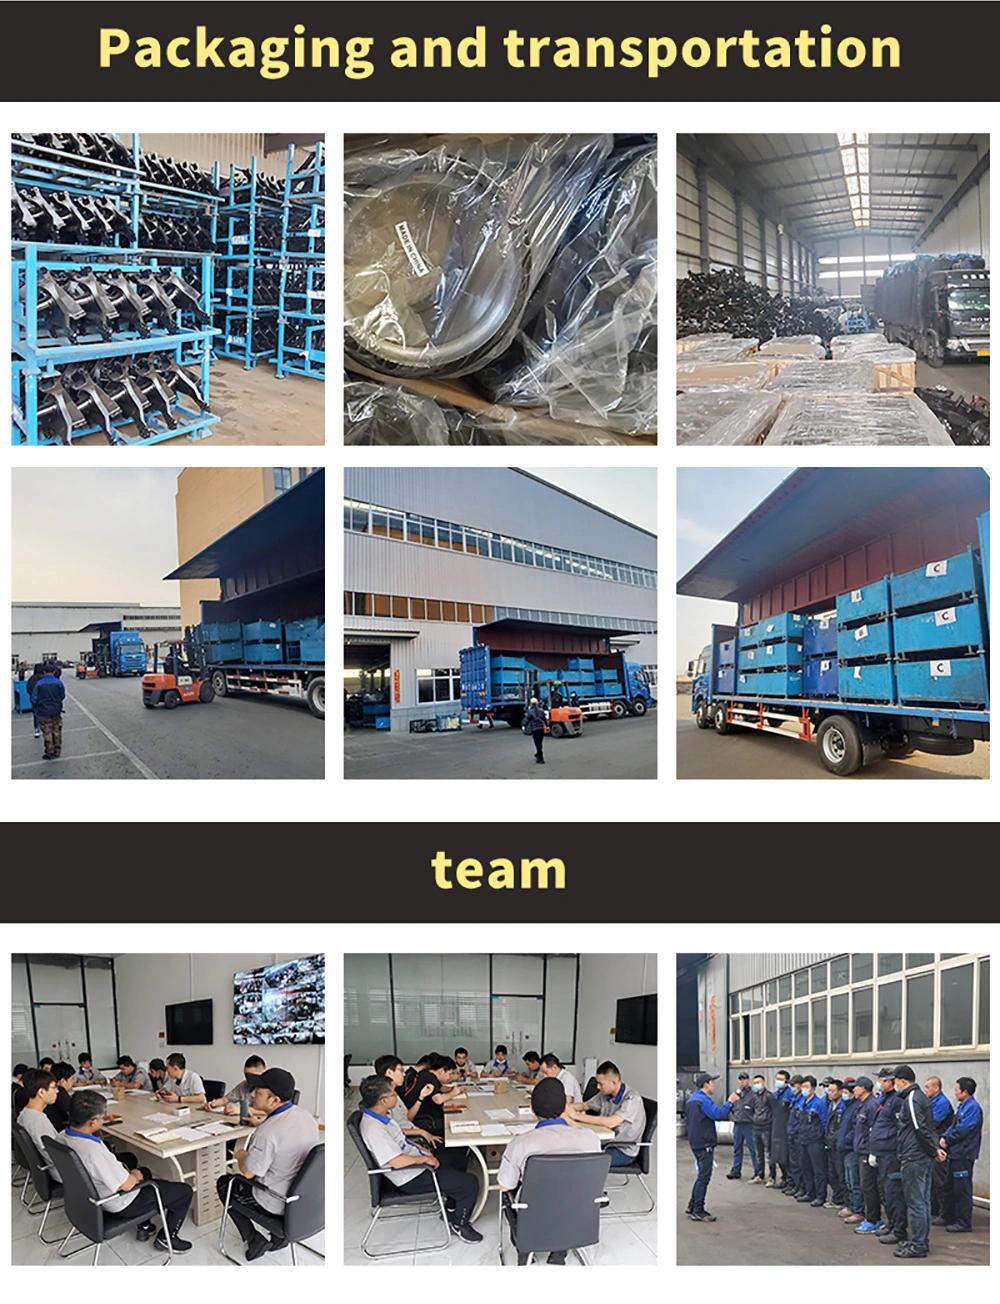 Hot Selling OEM Customized Truck Parts, Stamping Parts, Ductile Iron, Laser Cutting Services, Sand Castings